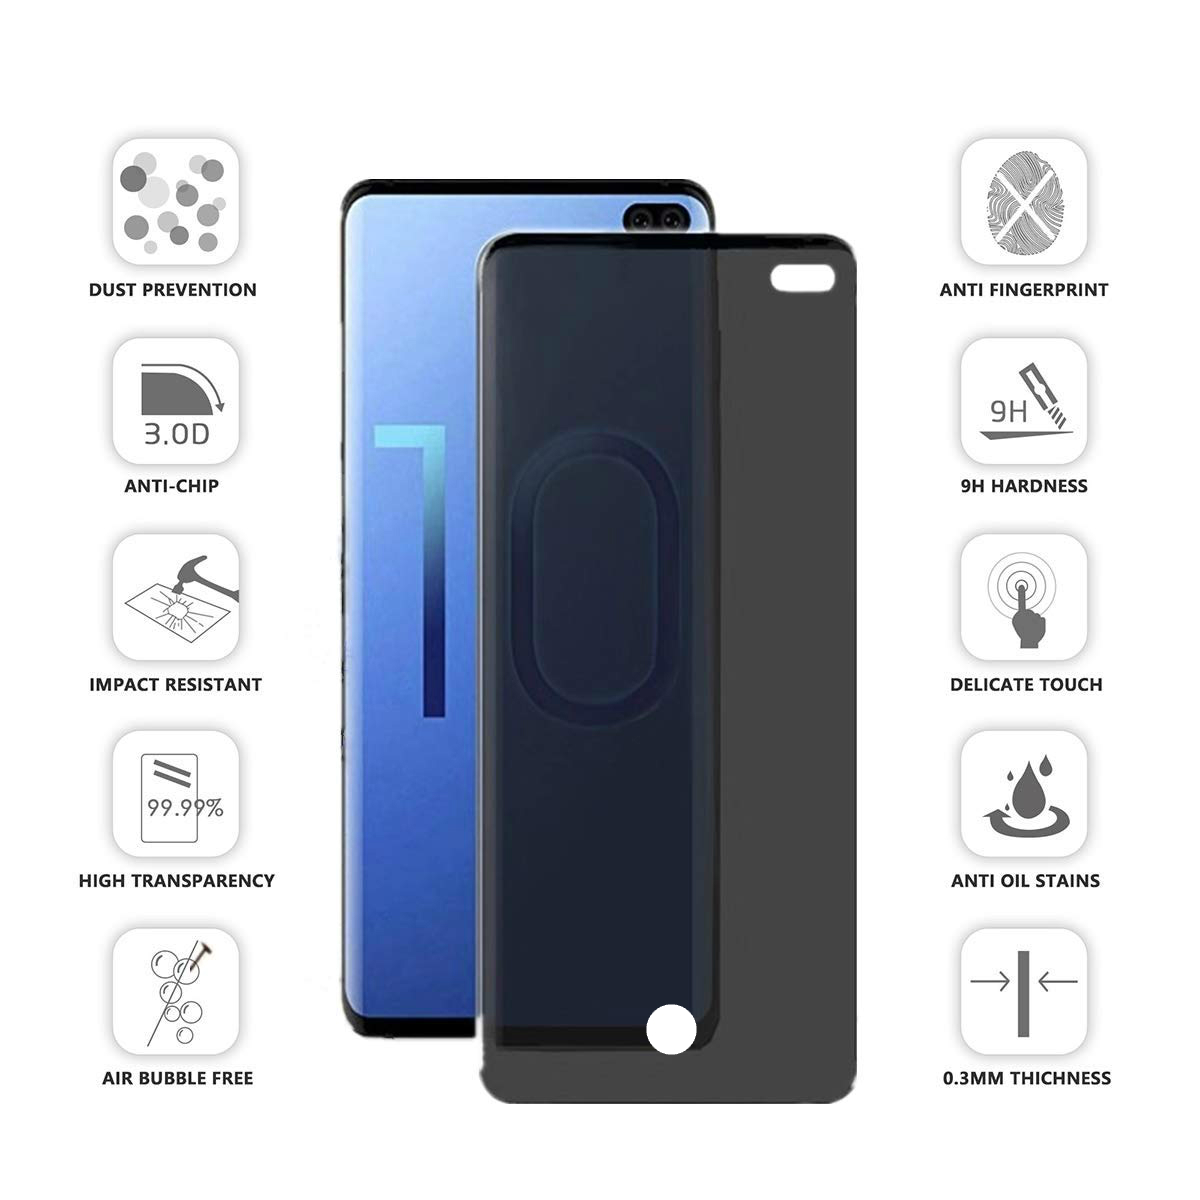 Bello Digital Fireplace Awesome Samsung Galaxy S10 Glass Privacy Anti Spy Screen Protector [case Friendly] 3d Curved Tempered Glass Screen Protector for Samsung Galaxy S10